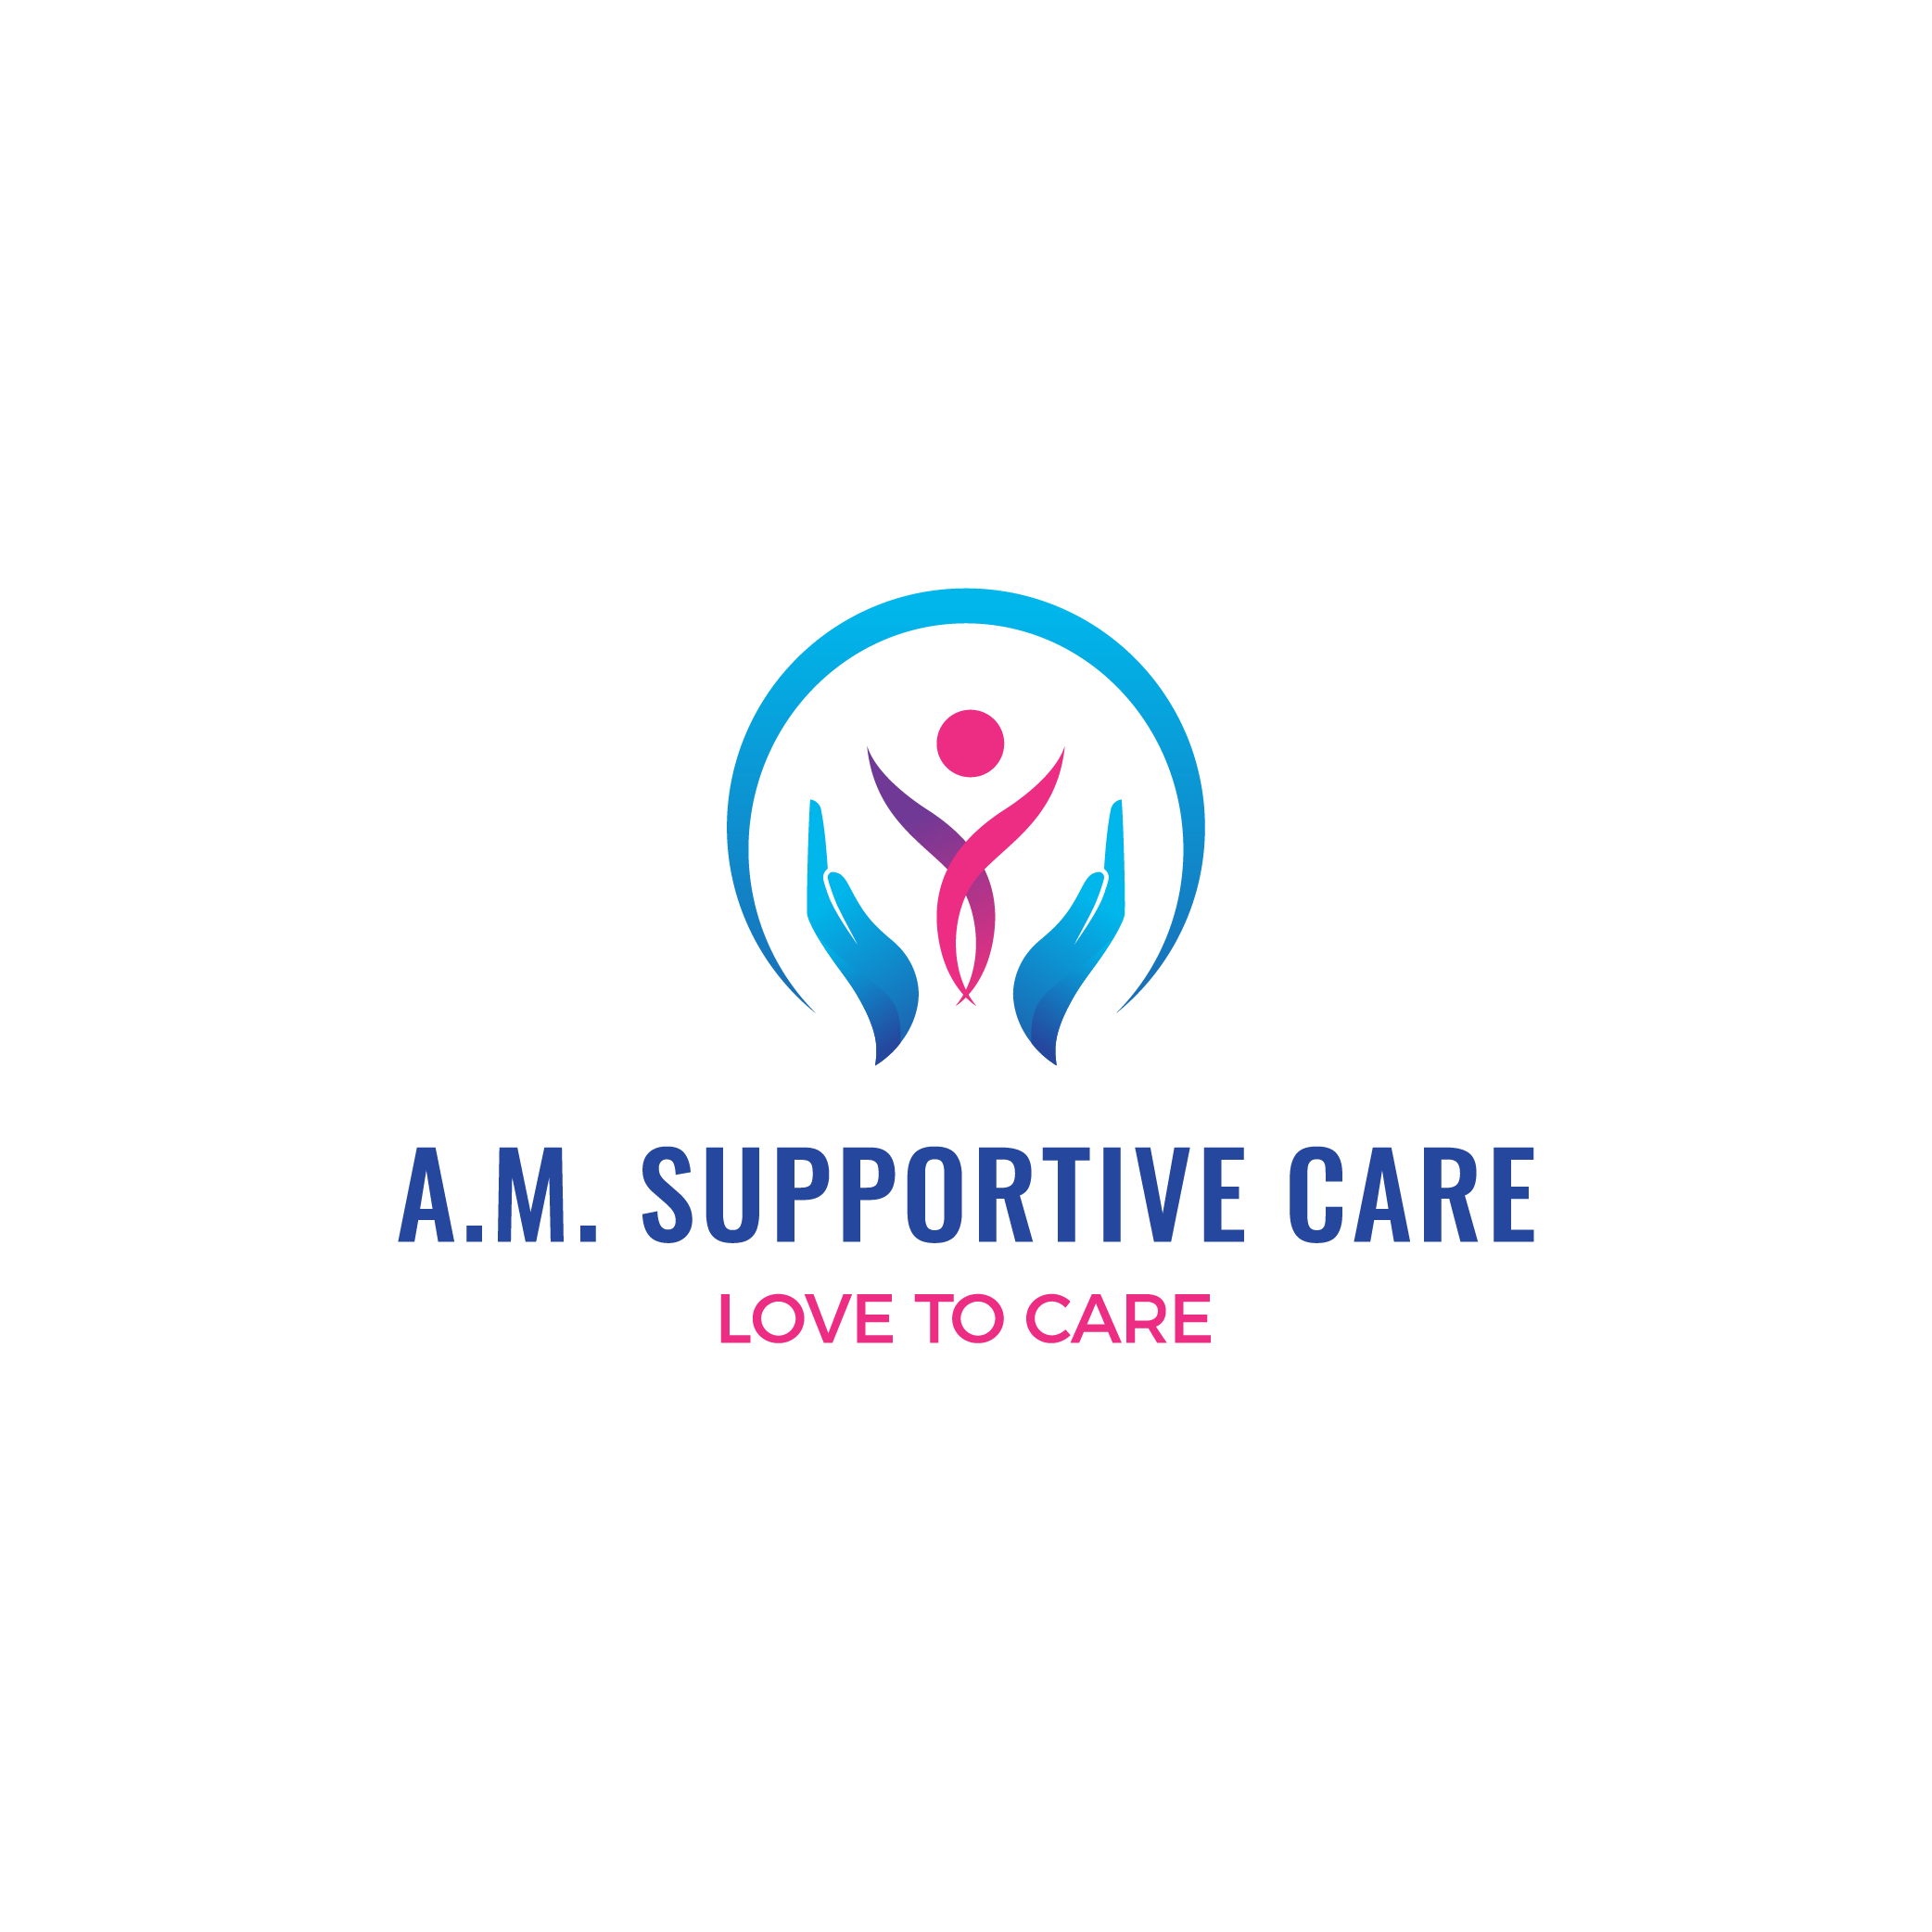 A.M. Supportive Care